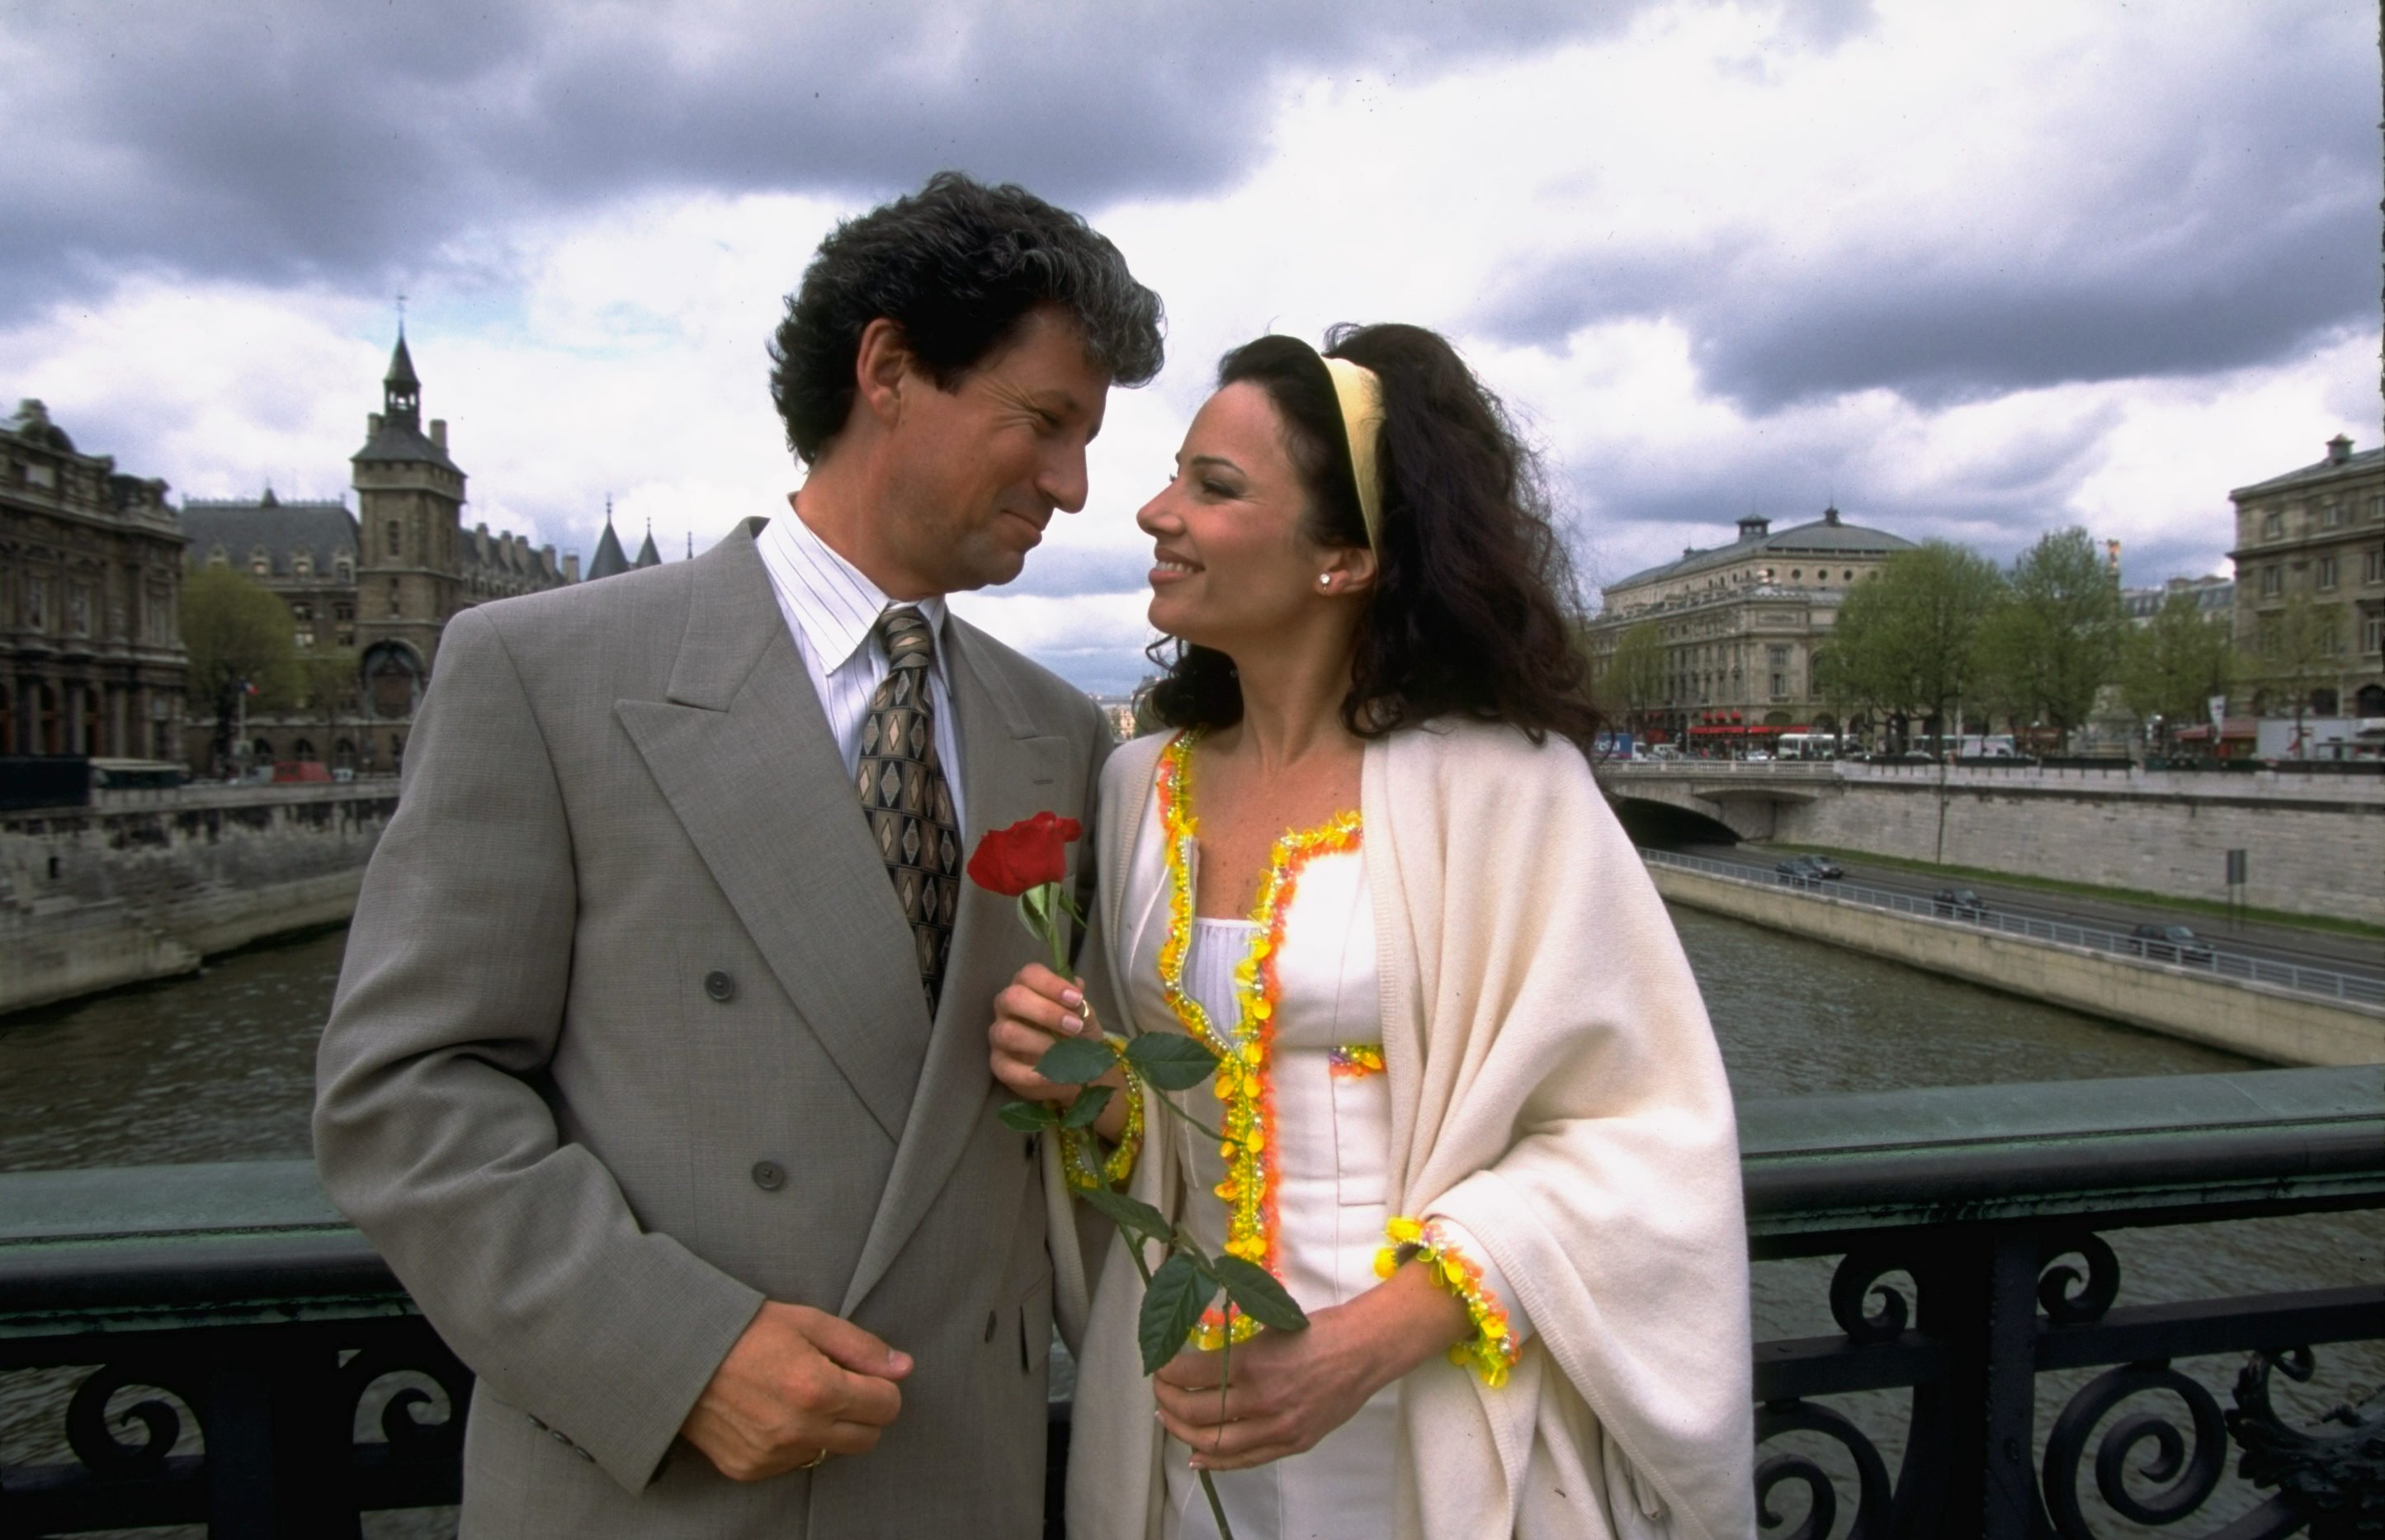 Charles Shaughnessy as Maxwell Sheffield and Fran Drescher as Fran Fine in 'The Nanny'